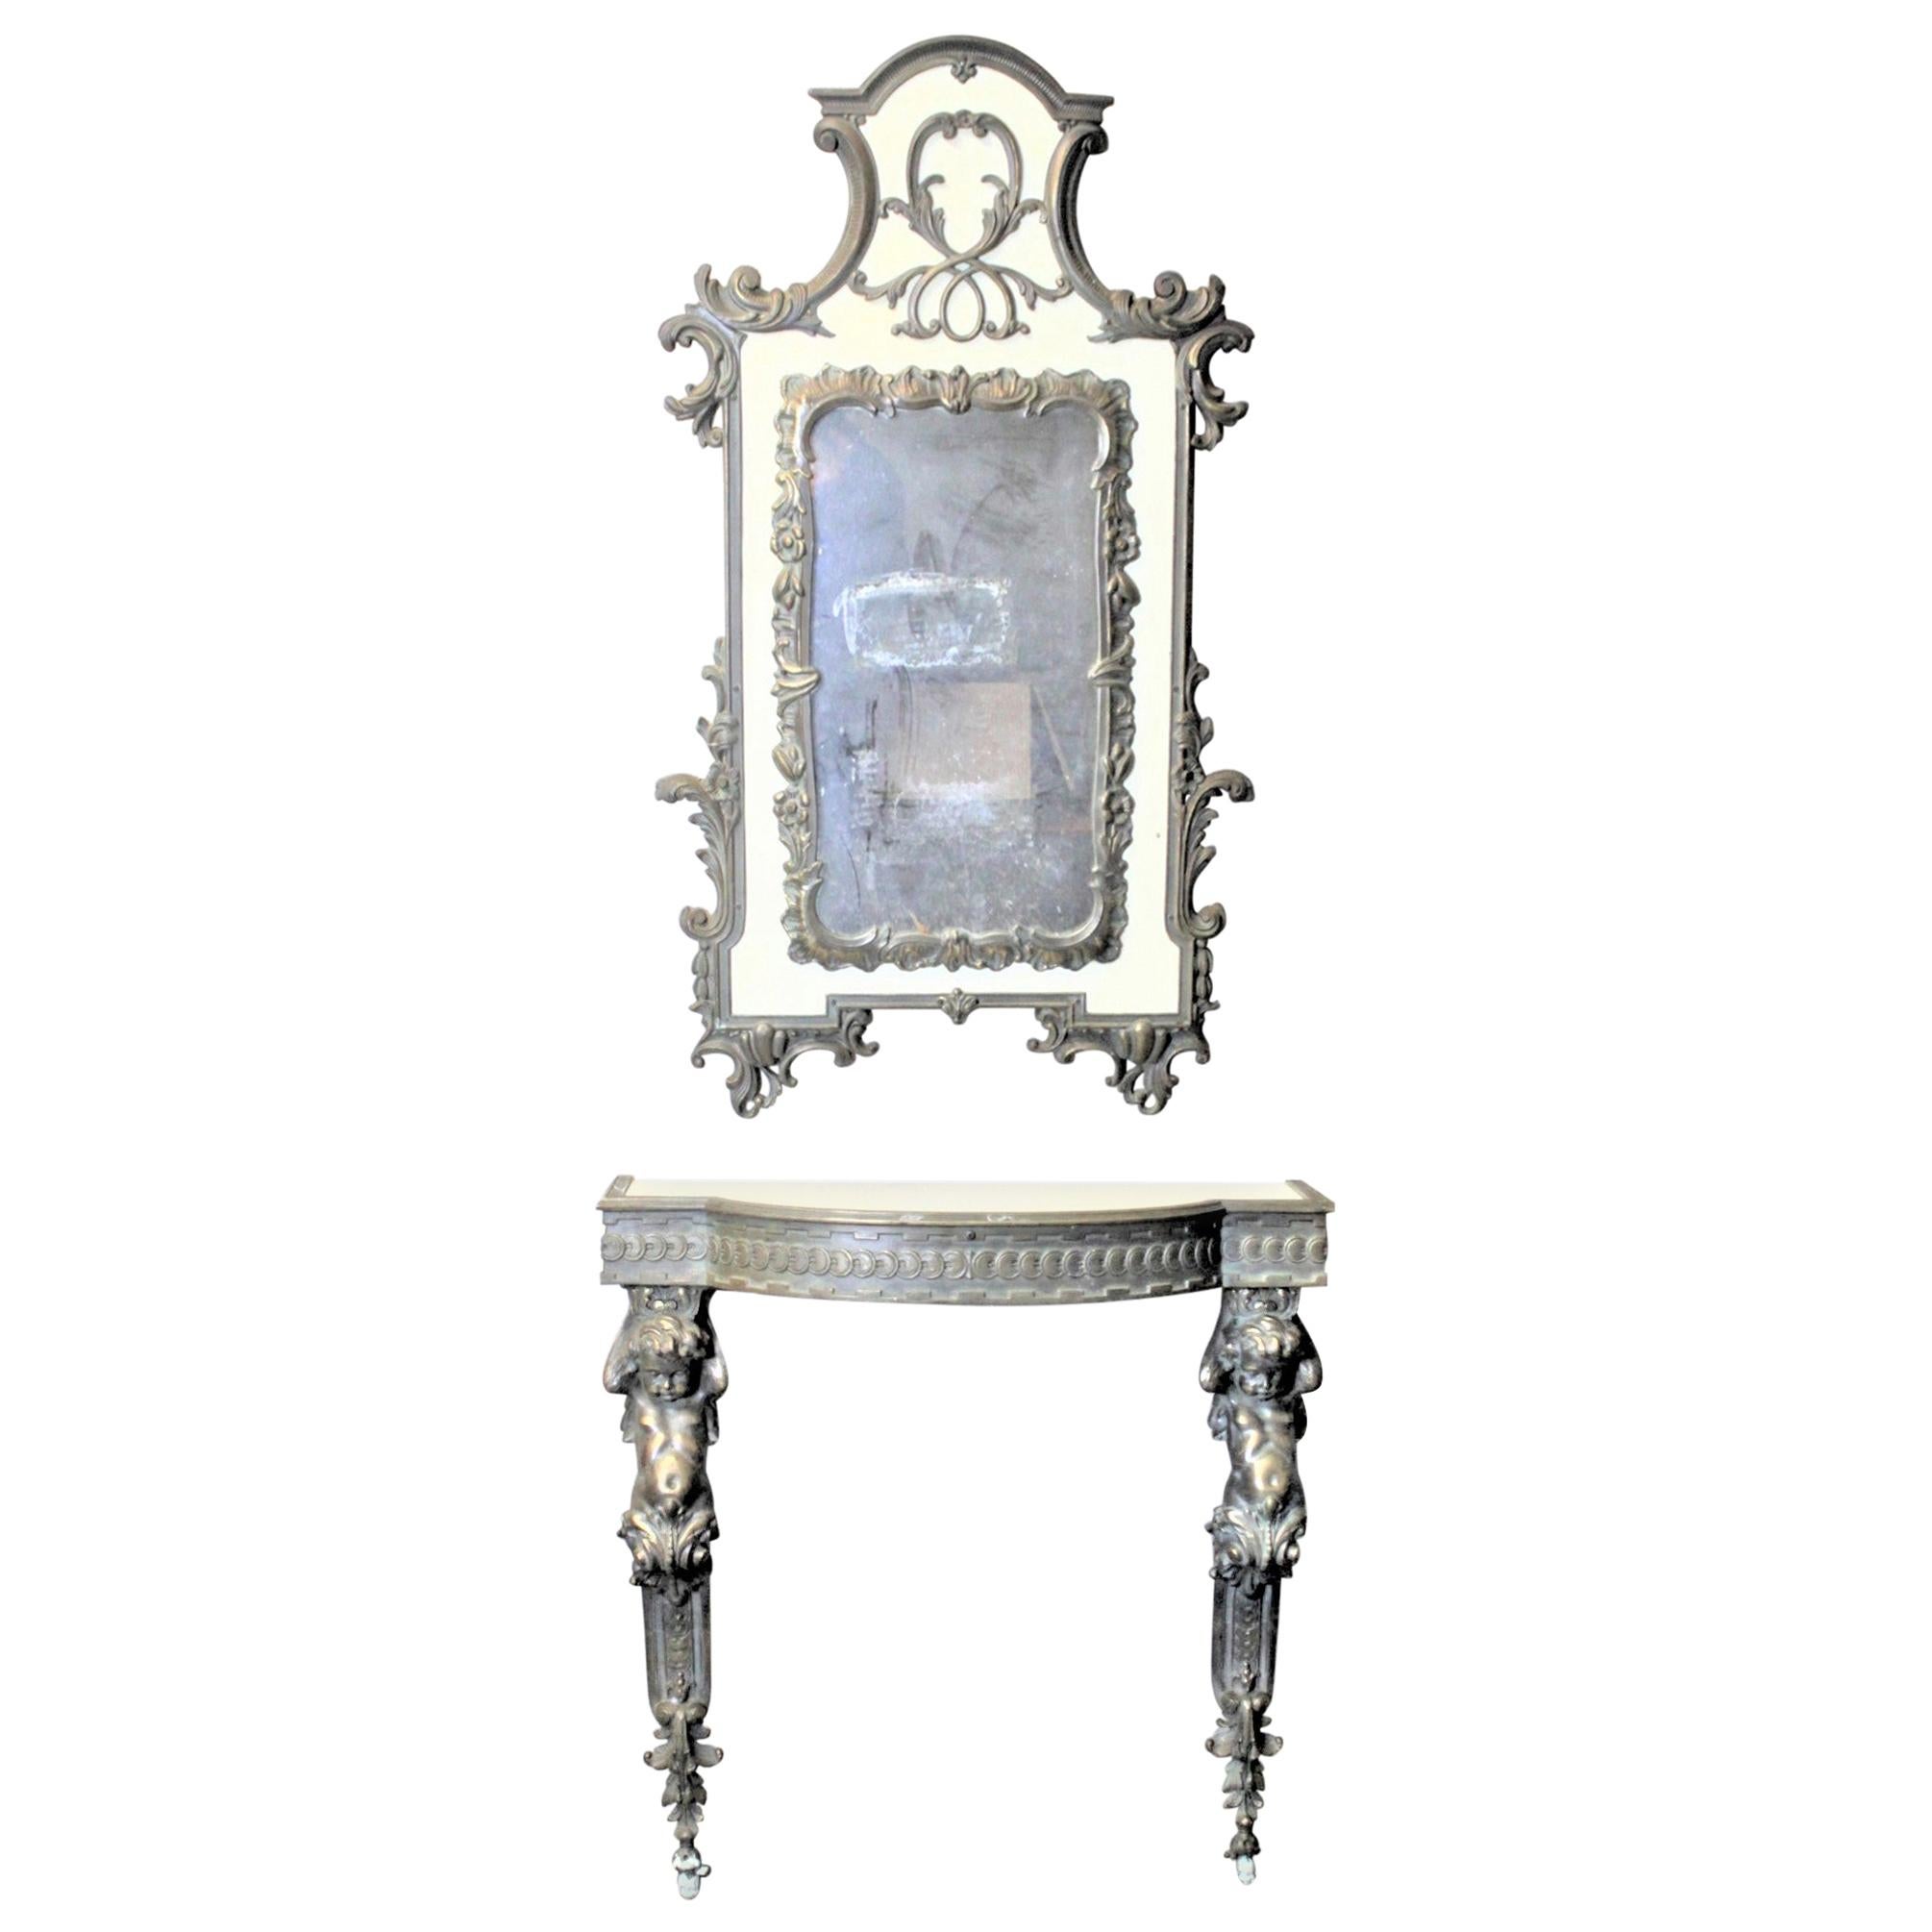 French Renaissance Revival Styled Console Table & Mirror with Brass Cherub Legs